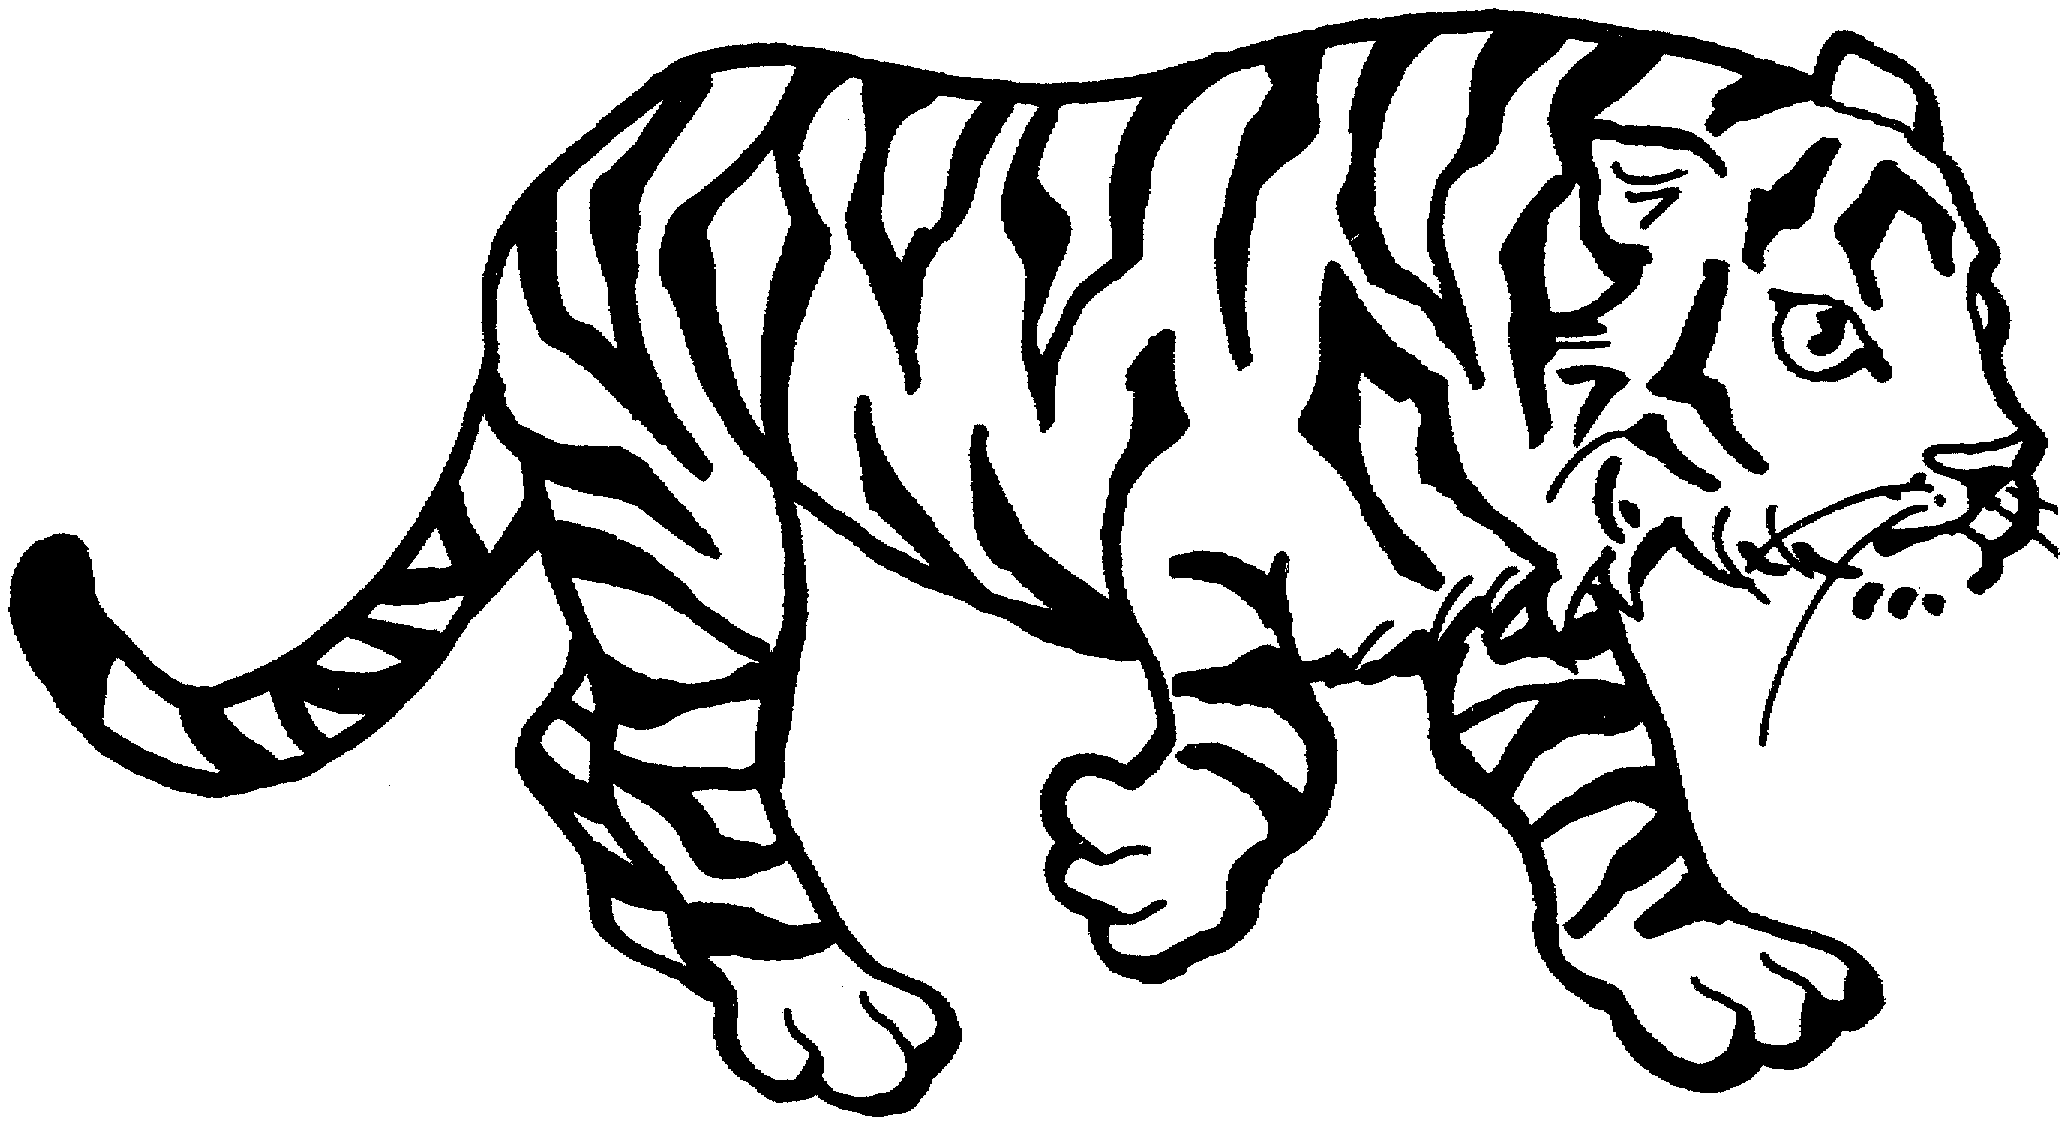 Free coloring pages of detroit tiger